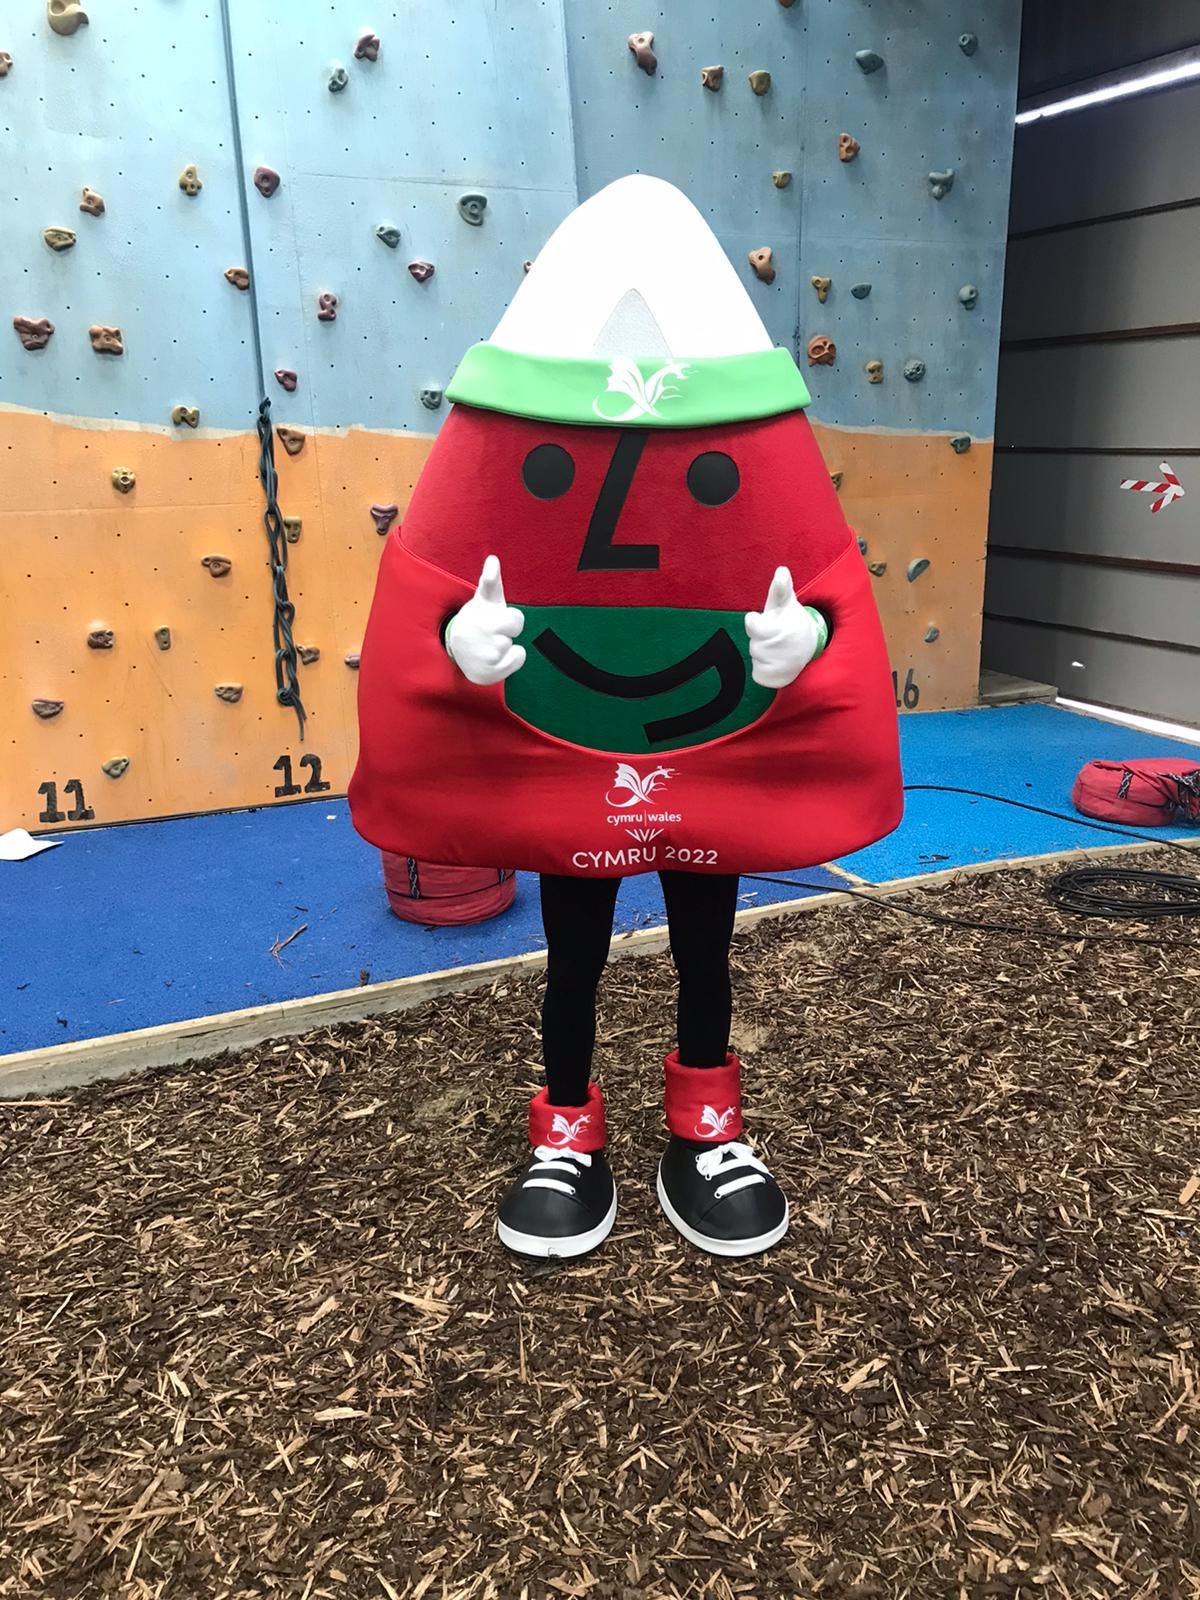 Mistar Urdd is set to make a number of public appearances in the build-up to Birmingham 2022 ©Twitter/TeamWales